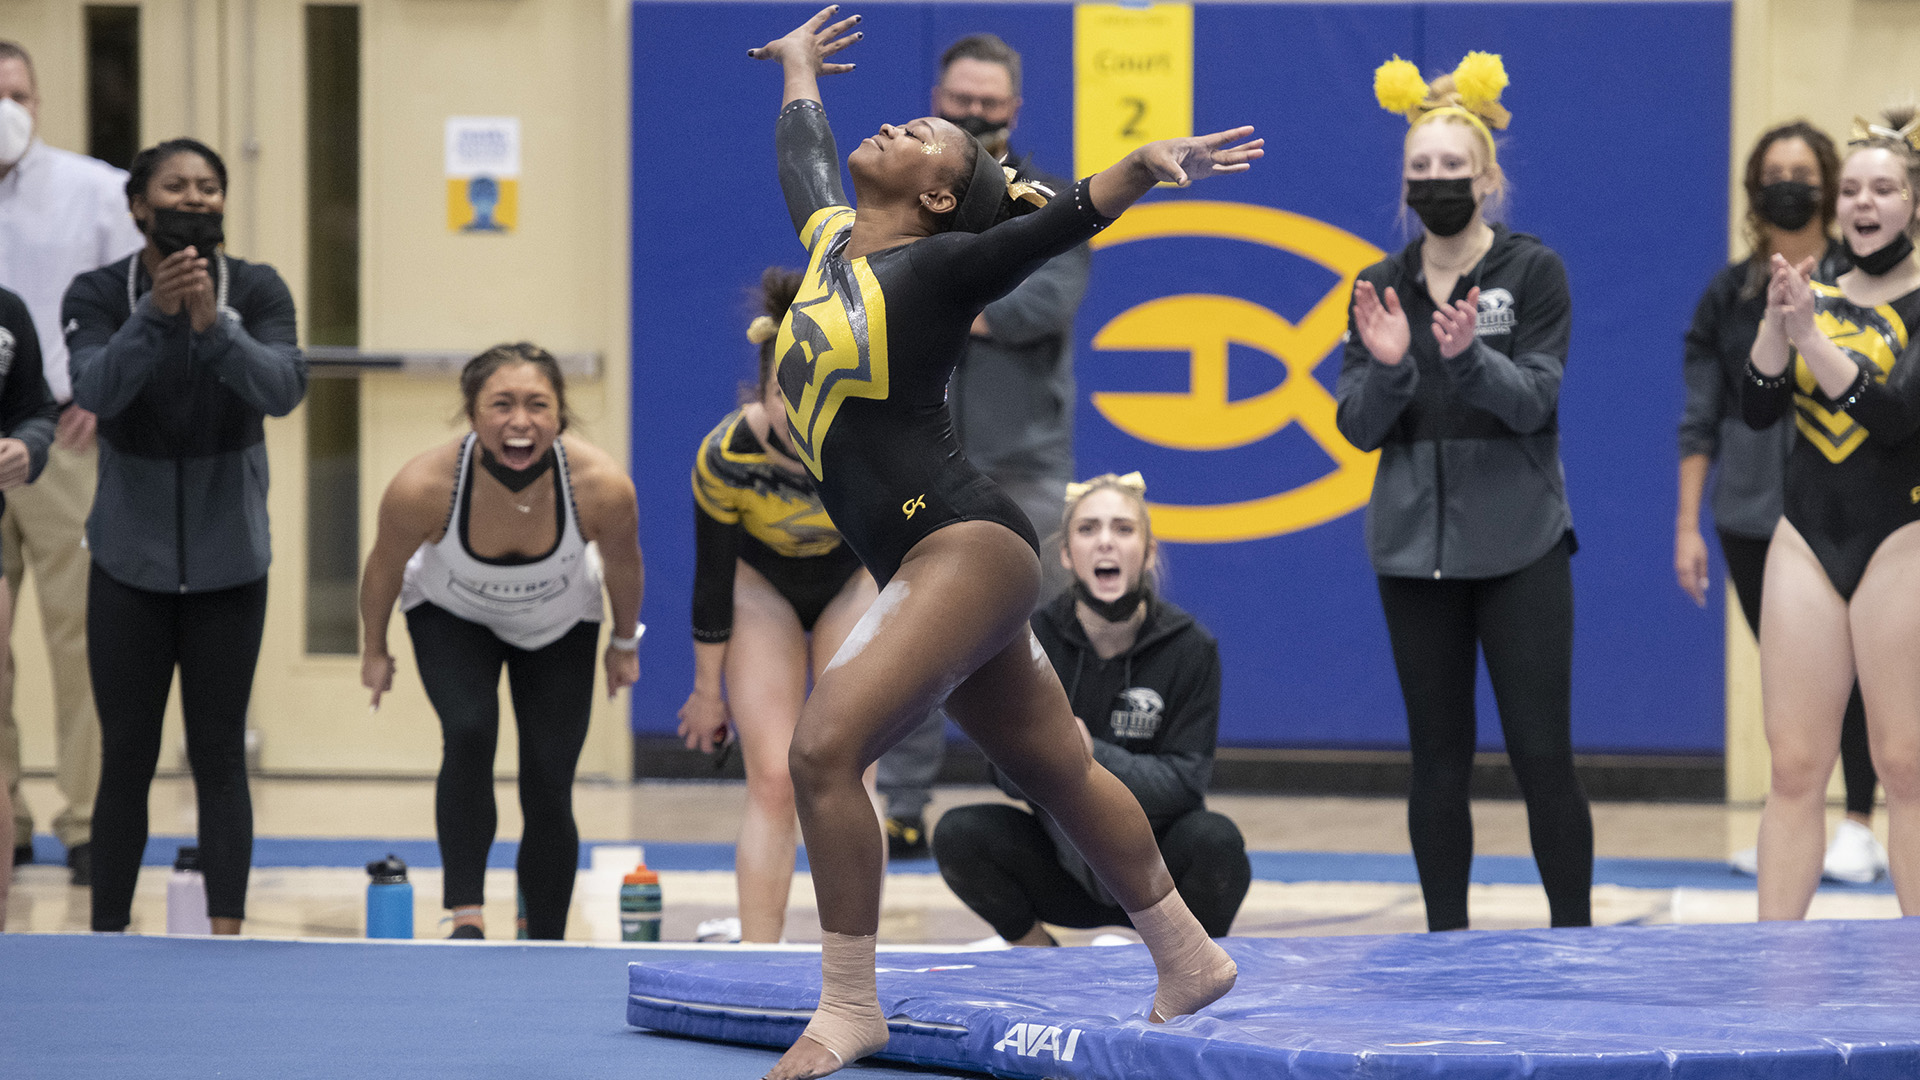 Trinity Sawyer took first place in the floor exercise and second on the uneven bars against the Blugolds.